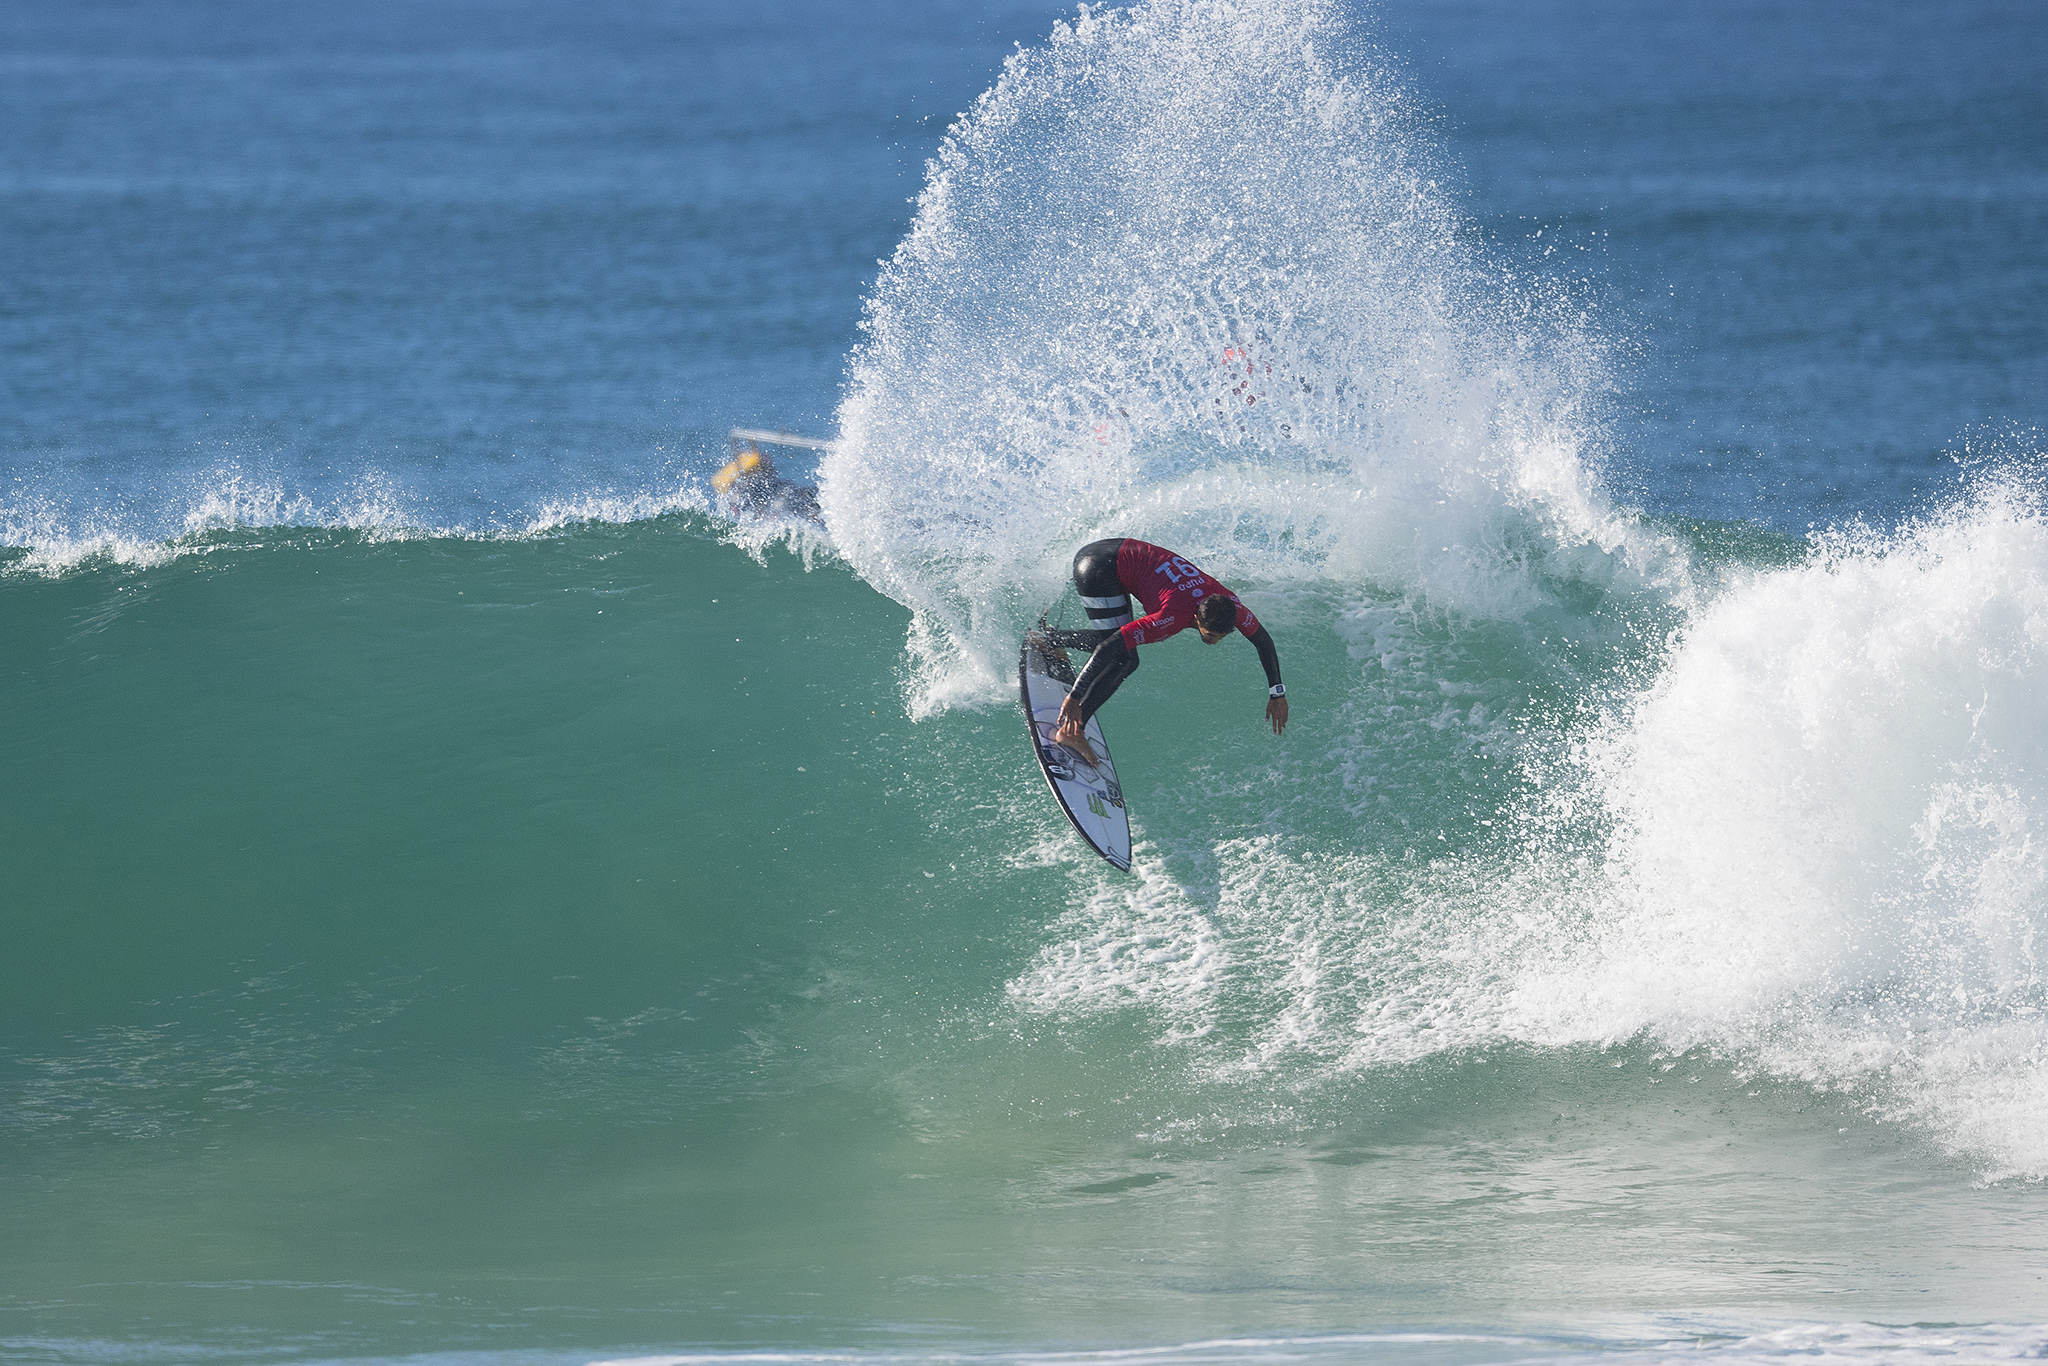 Miguel Pupo of Brasil (pictured) during round 2 at the JBay Open on Thursday July 7, 2016. PHOTO: © WSL/ Kirstin SOCIAL @wsl @kirstinscholtz This is a hand-out image from the Association of Surfing Professionals LLC ("World Surf League") for editorial use only. No commercial rights are granted to the Images in any way. The Images are provided on an "as is" basis and no warranty is provided for use of a particular purpose. Rights to individuals within the Images are not provided. The copyright is owned by World Surf League. Sale or license of the Images is prohibited. ALL RIGHTS RESERVED.